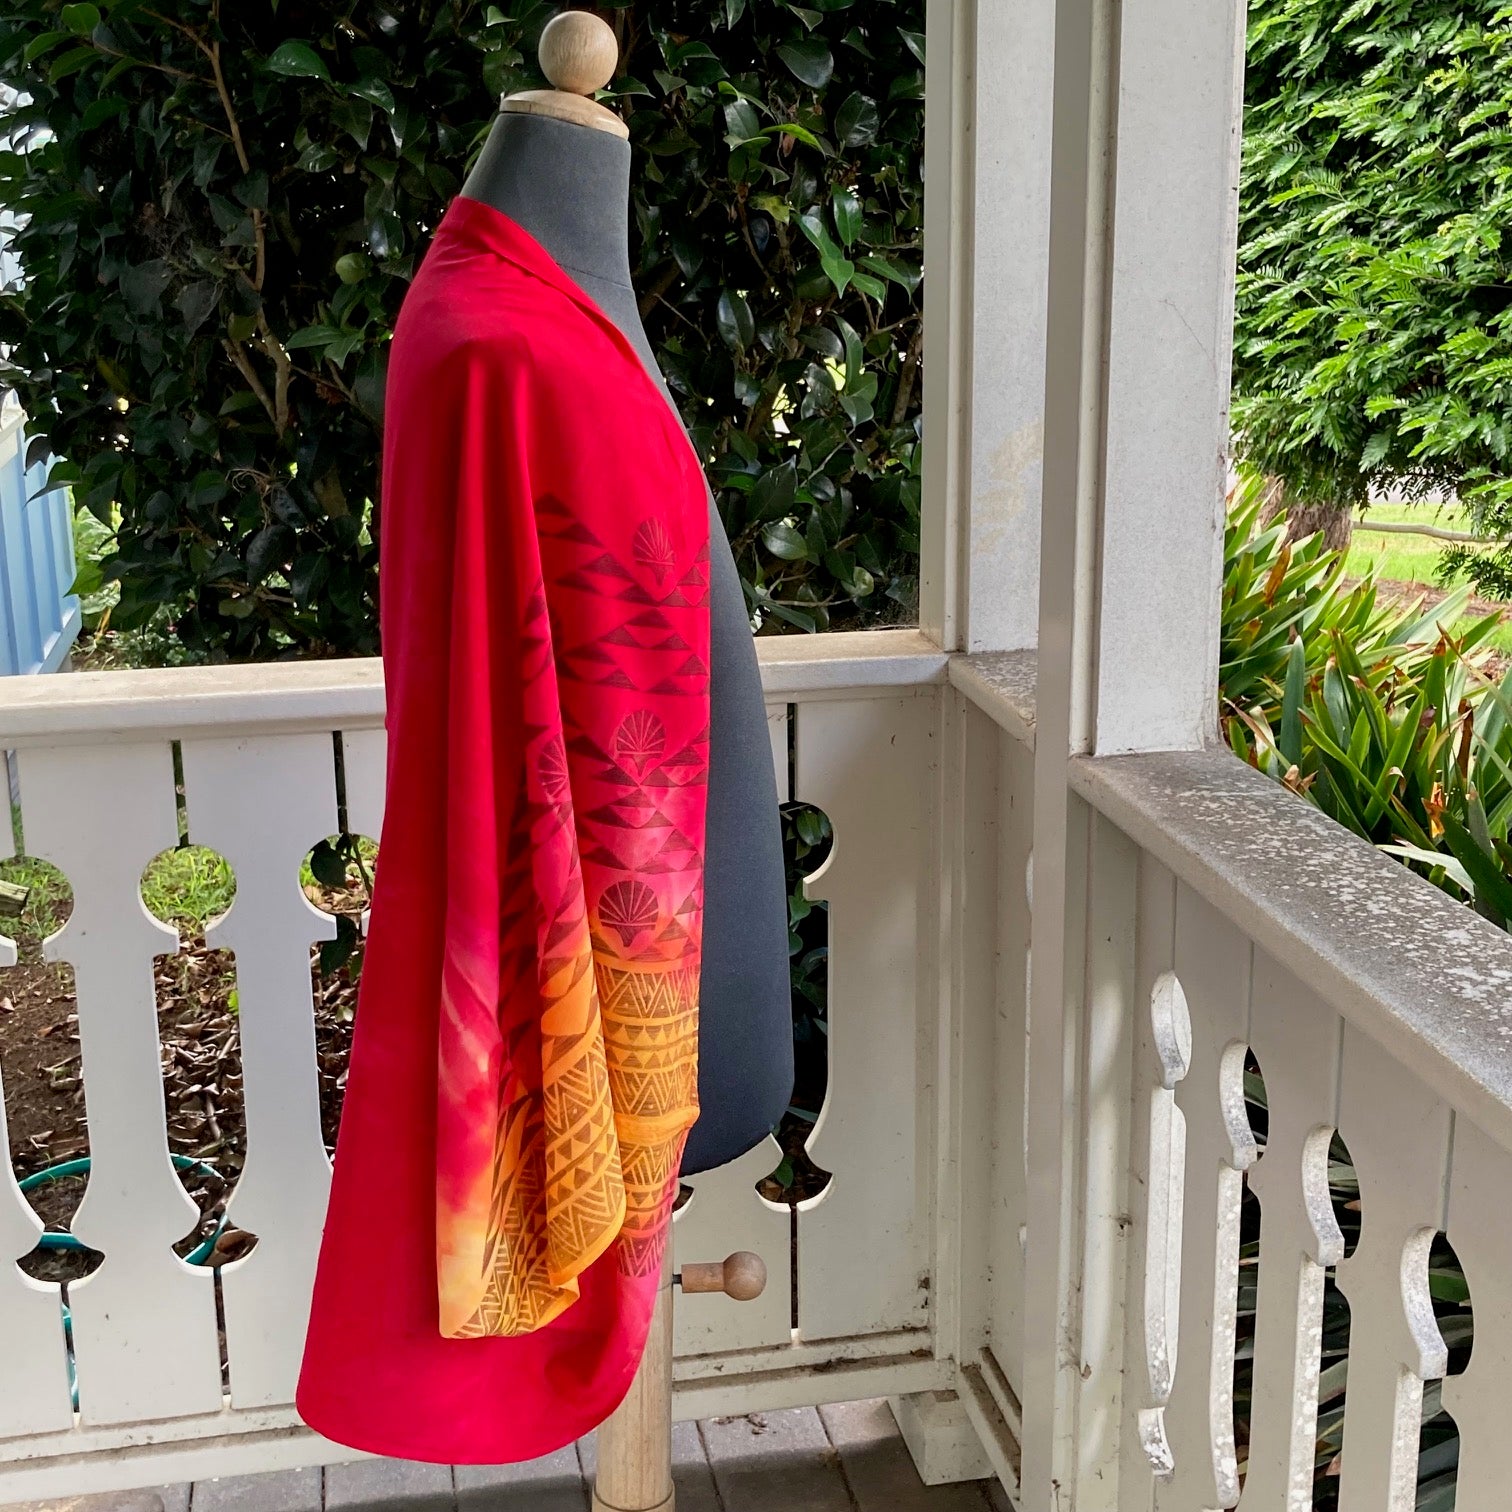 Ohe Kapala Shrug in Red and Yellow with the Lehua and the Mauna